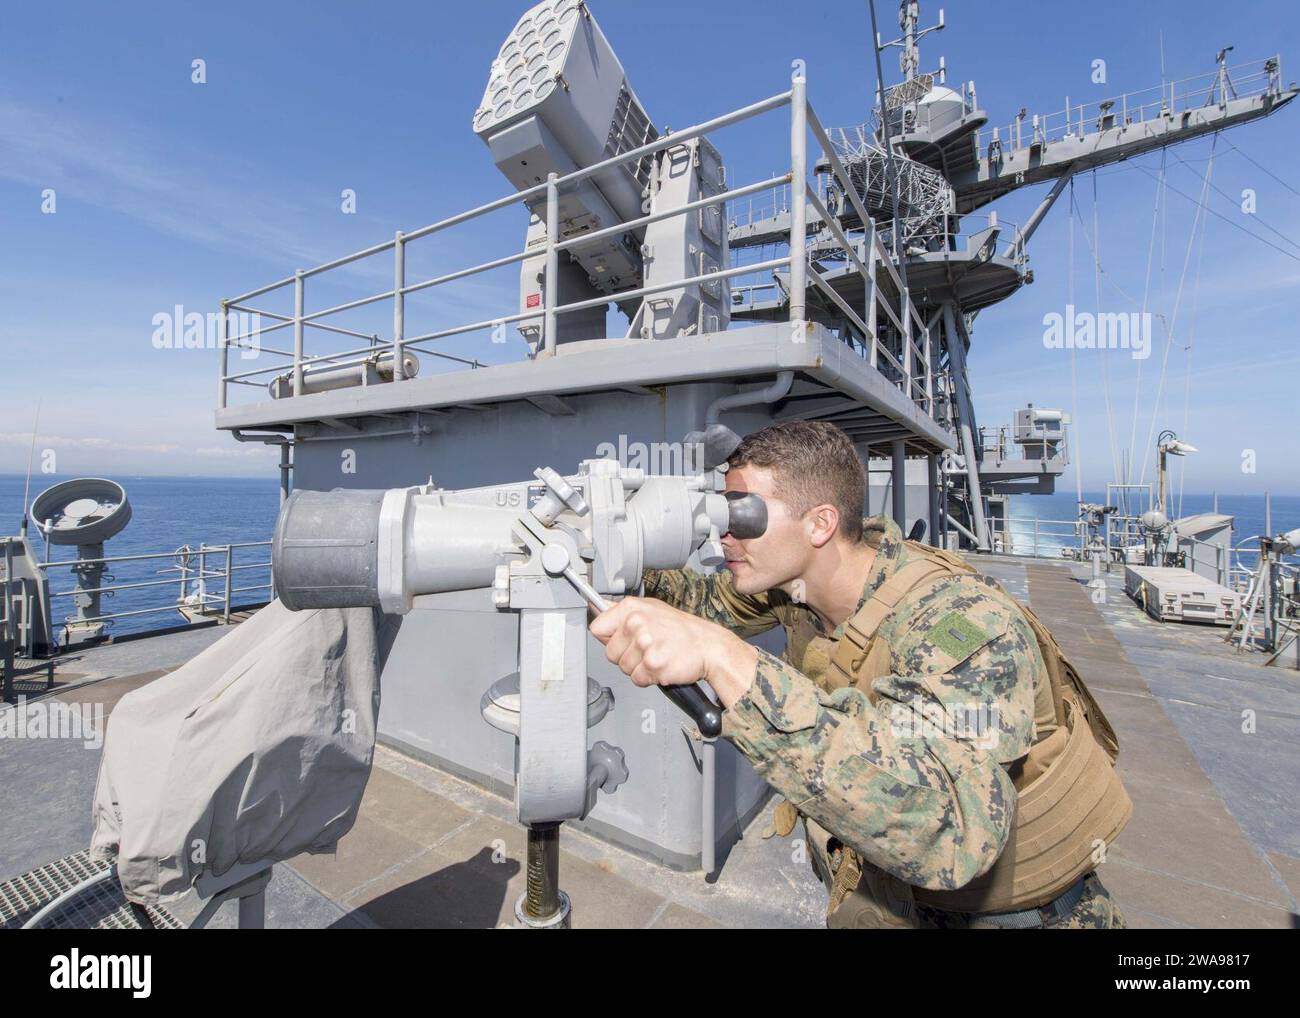 US military forces. 180522PC620-0066 STRAIT OF GIBRALTAR (May 22, 2018) U.S. Marine 1st Lt. Austin Lorah, stands lookout as the Harpers Ferry-class dock landing ship USS Oak Hill (LSD 51) transits the Strait of Gibraltar May 22, 2018. Oak Hill, homeported in Virginia Beach, Virginia, is conducting naval operations in the U.S. 6th Fleet area of operations. (U.S. Navy photo by Mass Communication Specialist 3rd Class Michael H. Lehman/Released) Stock Photo